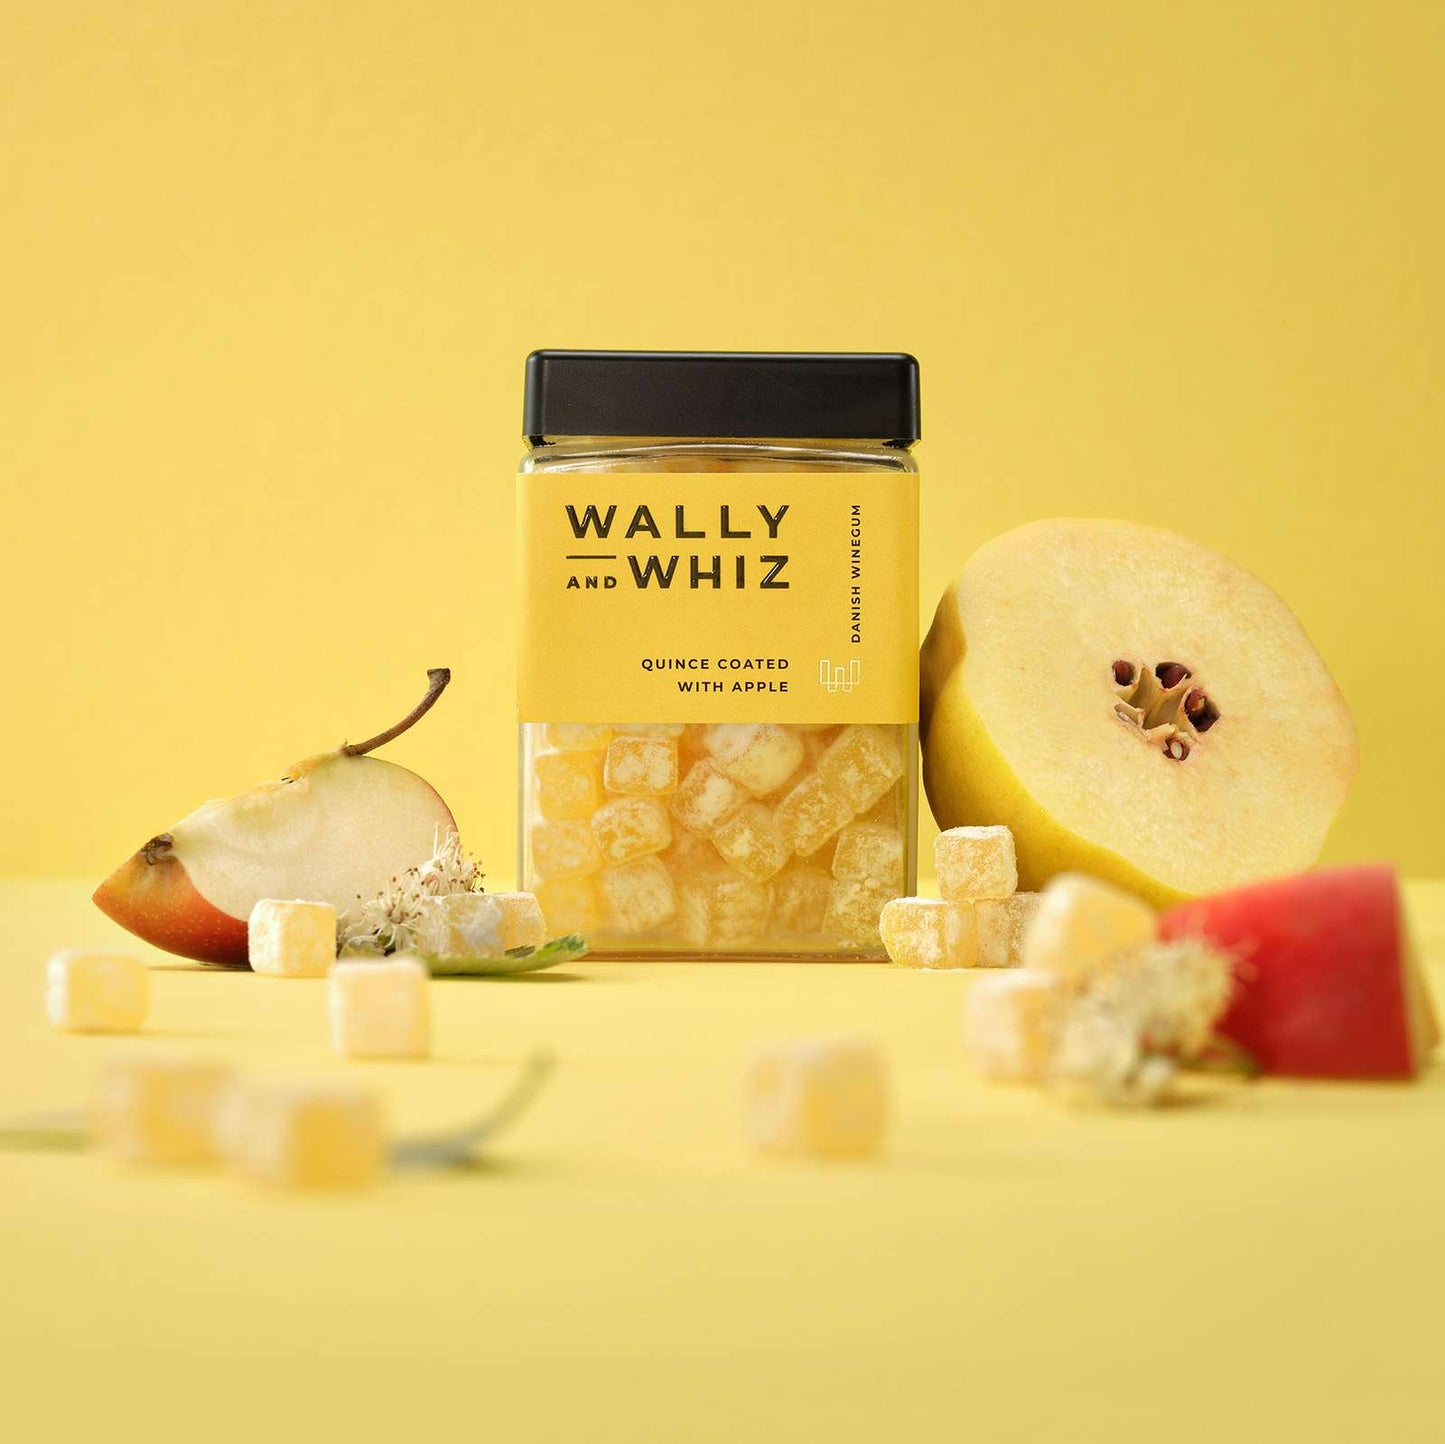 Wally and Whiz - Quince w. Apples, regular